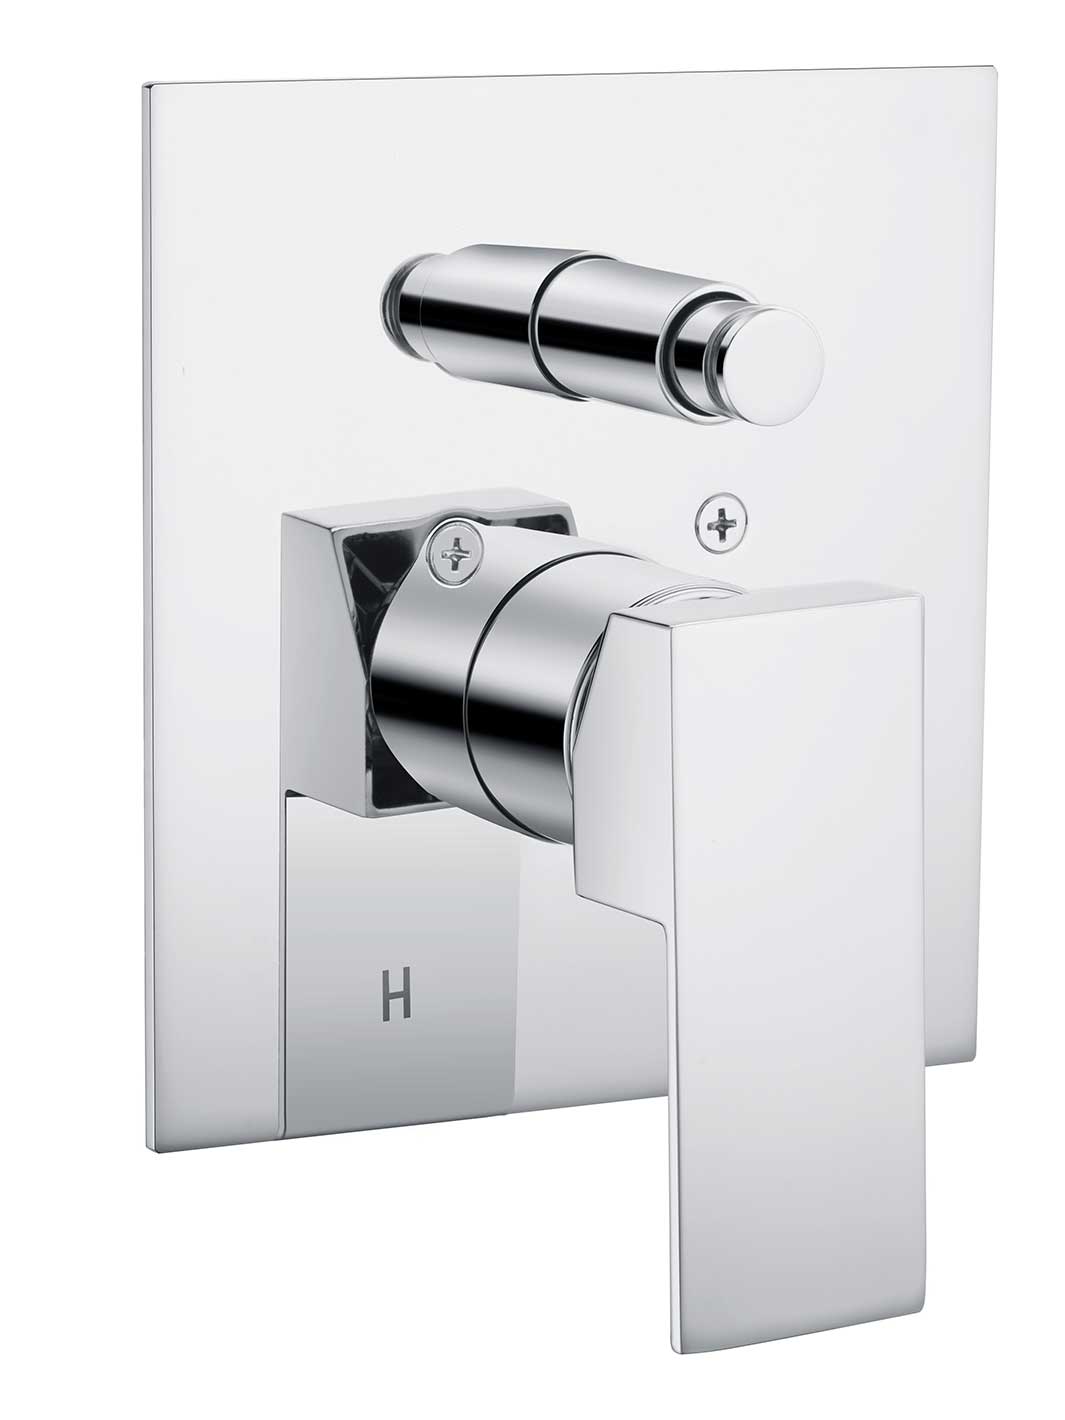 Shower diverter with single lever control. Chrome finish